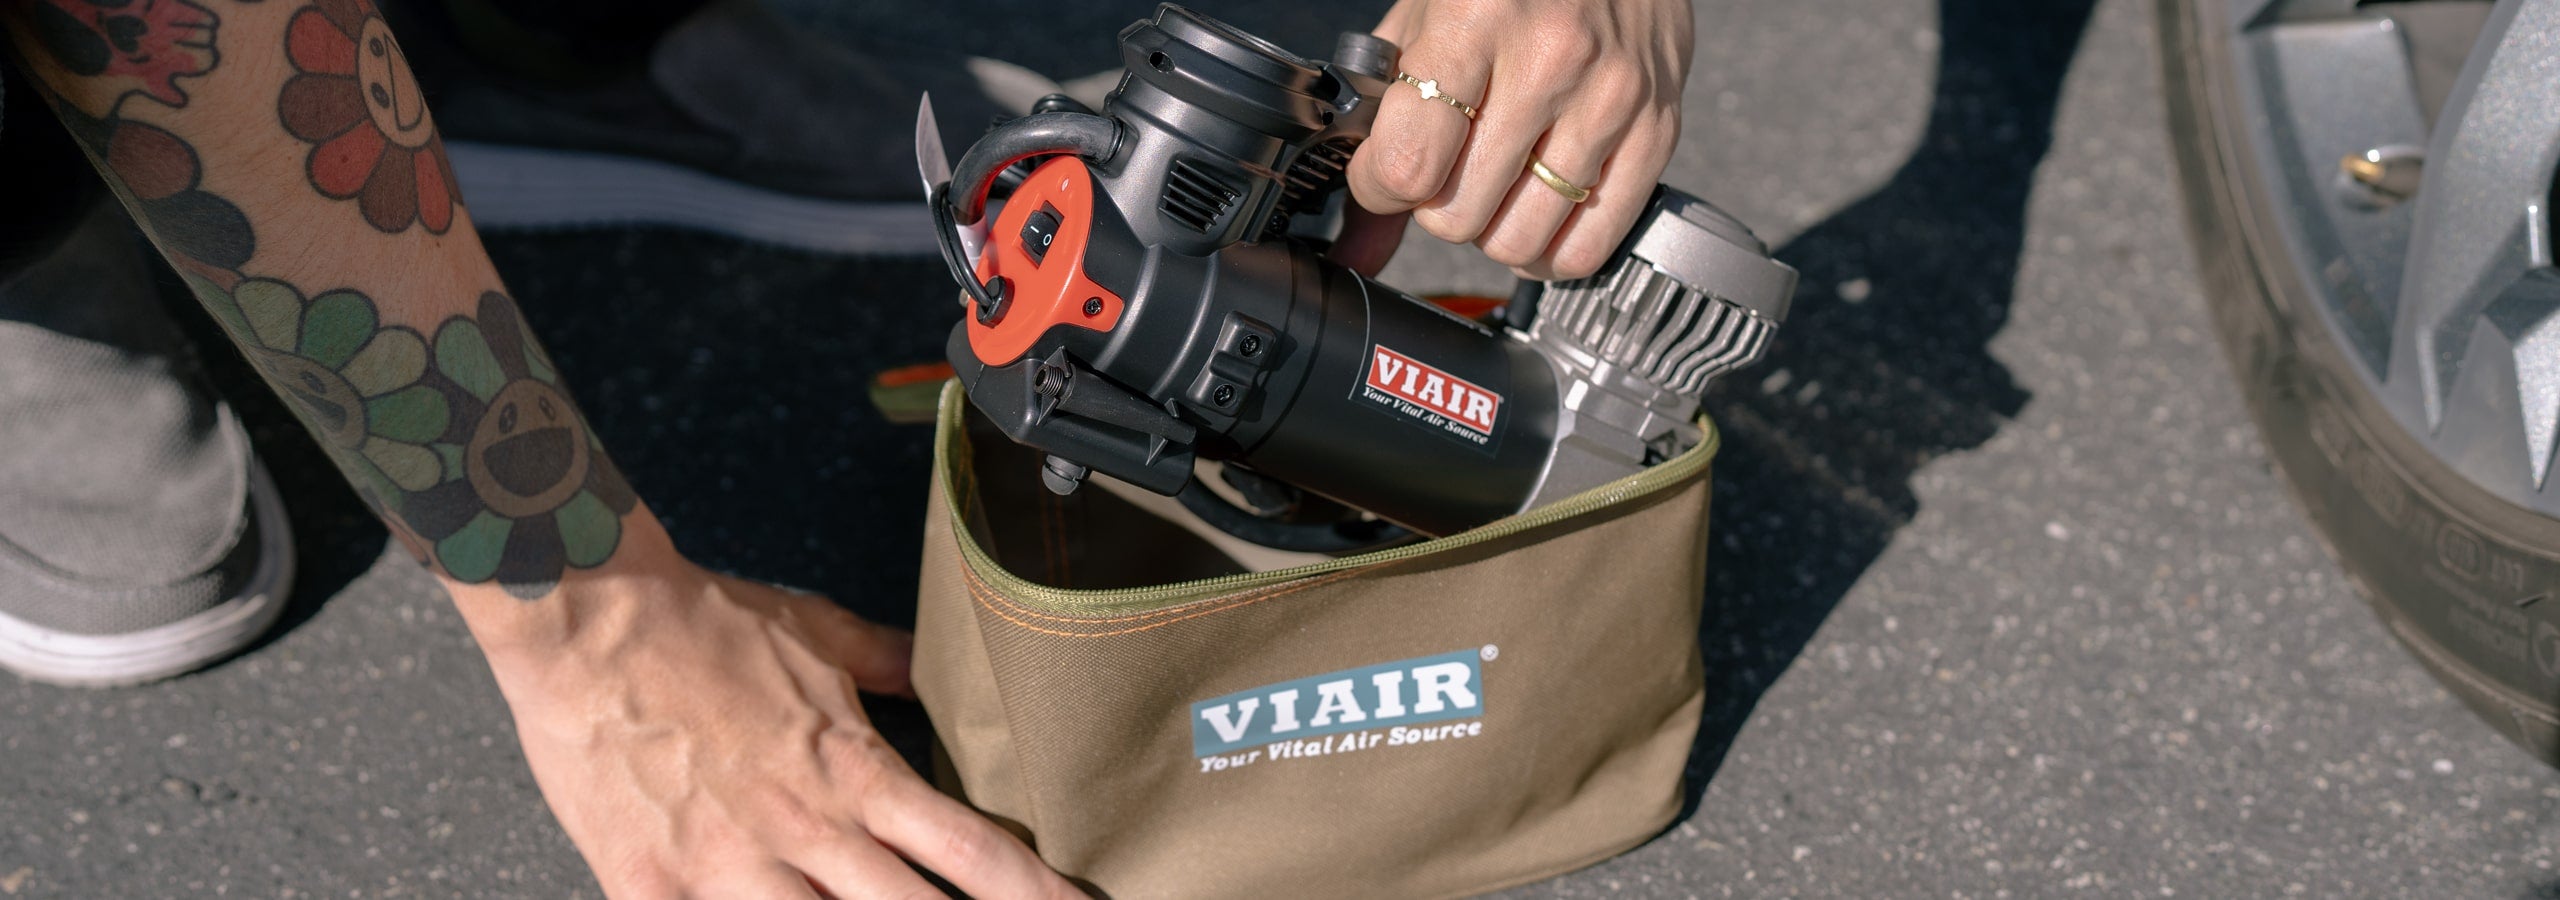 Shop Air Compressor Collections & More – Viair Corp